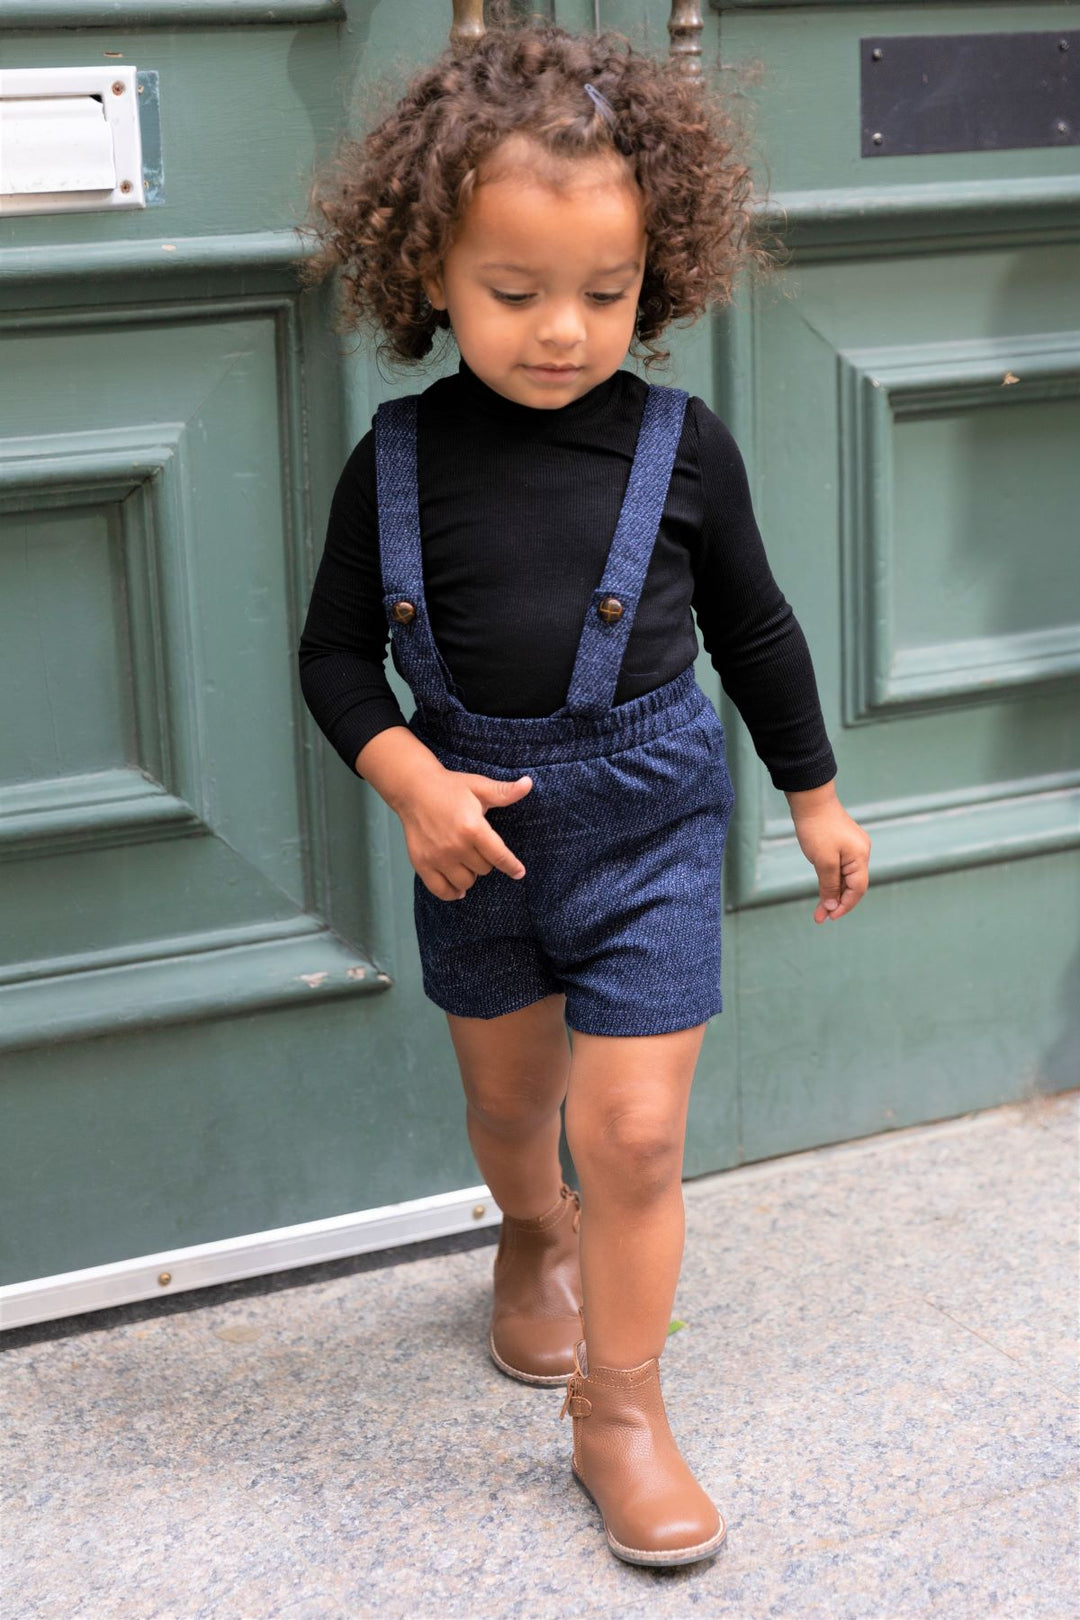 Baby Mélange Mix Overall